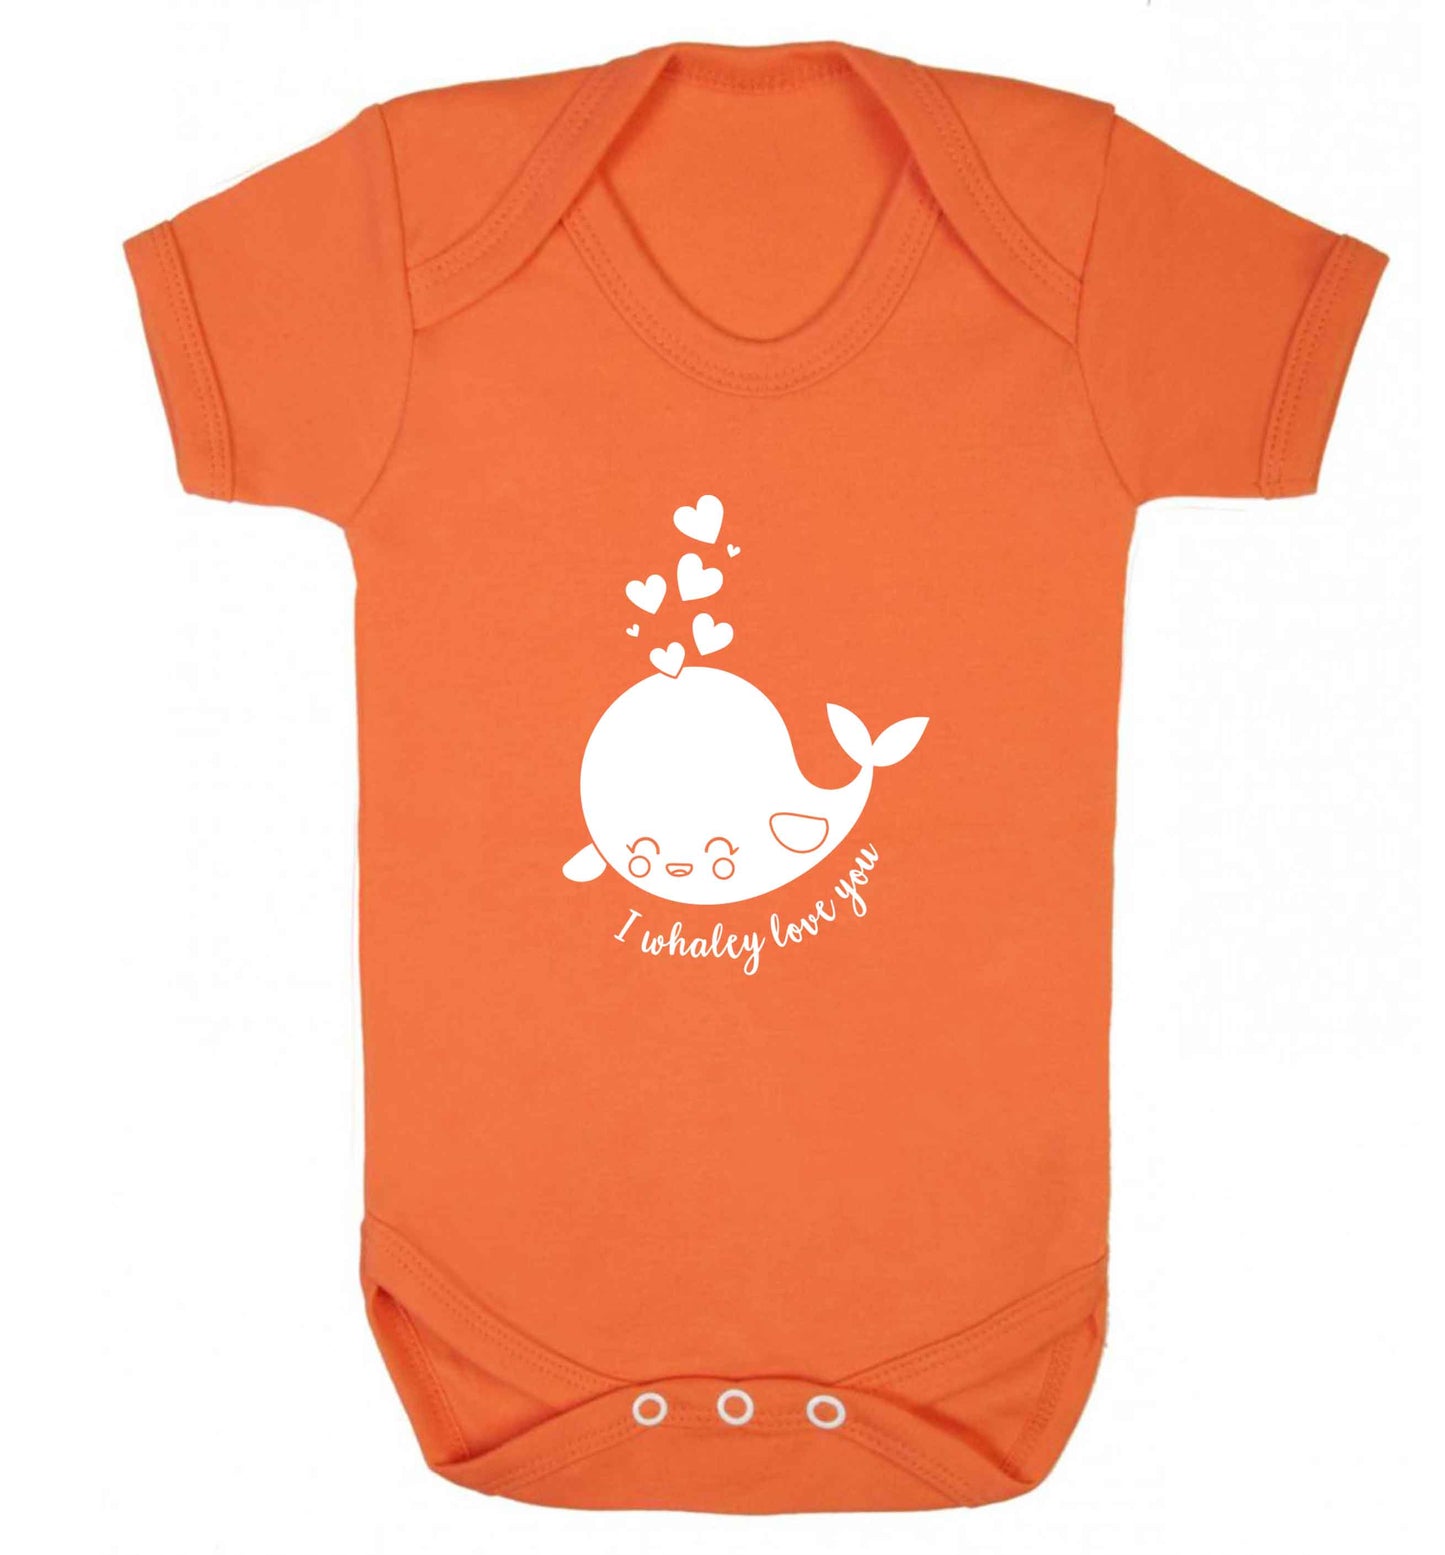 I whaley love you baby vest orange 18-24 months